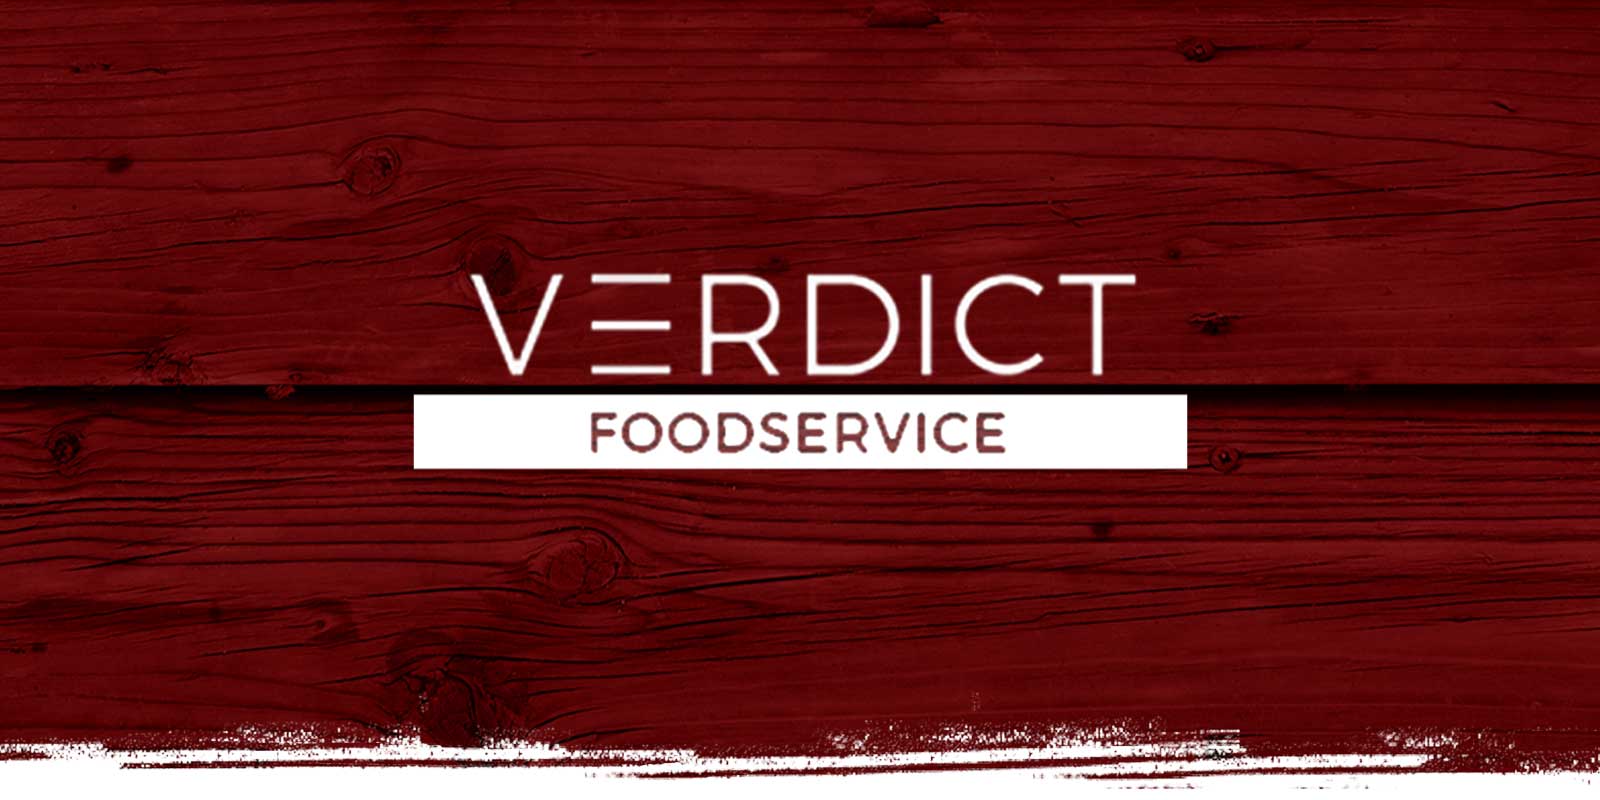 Verdict Foodservice logo on red weathered wood background